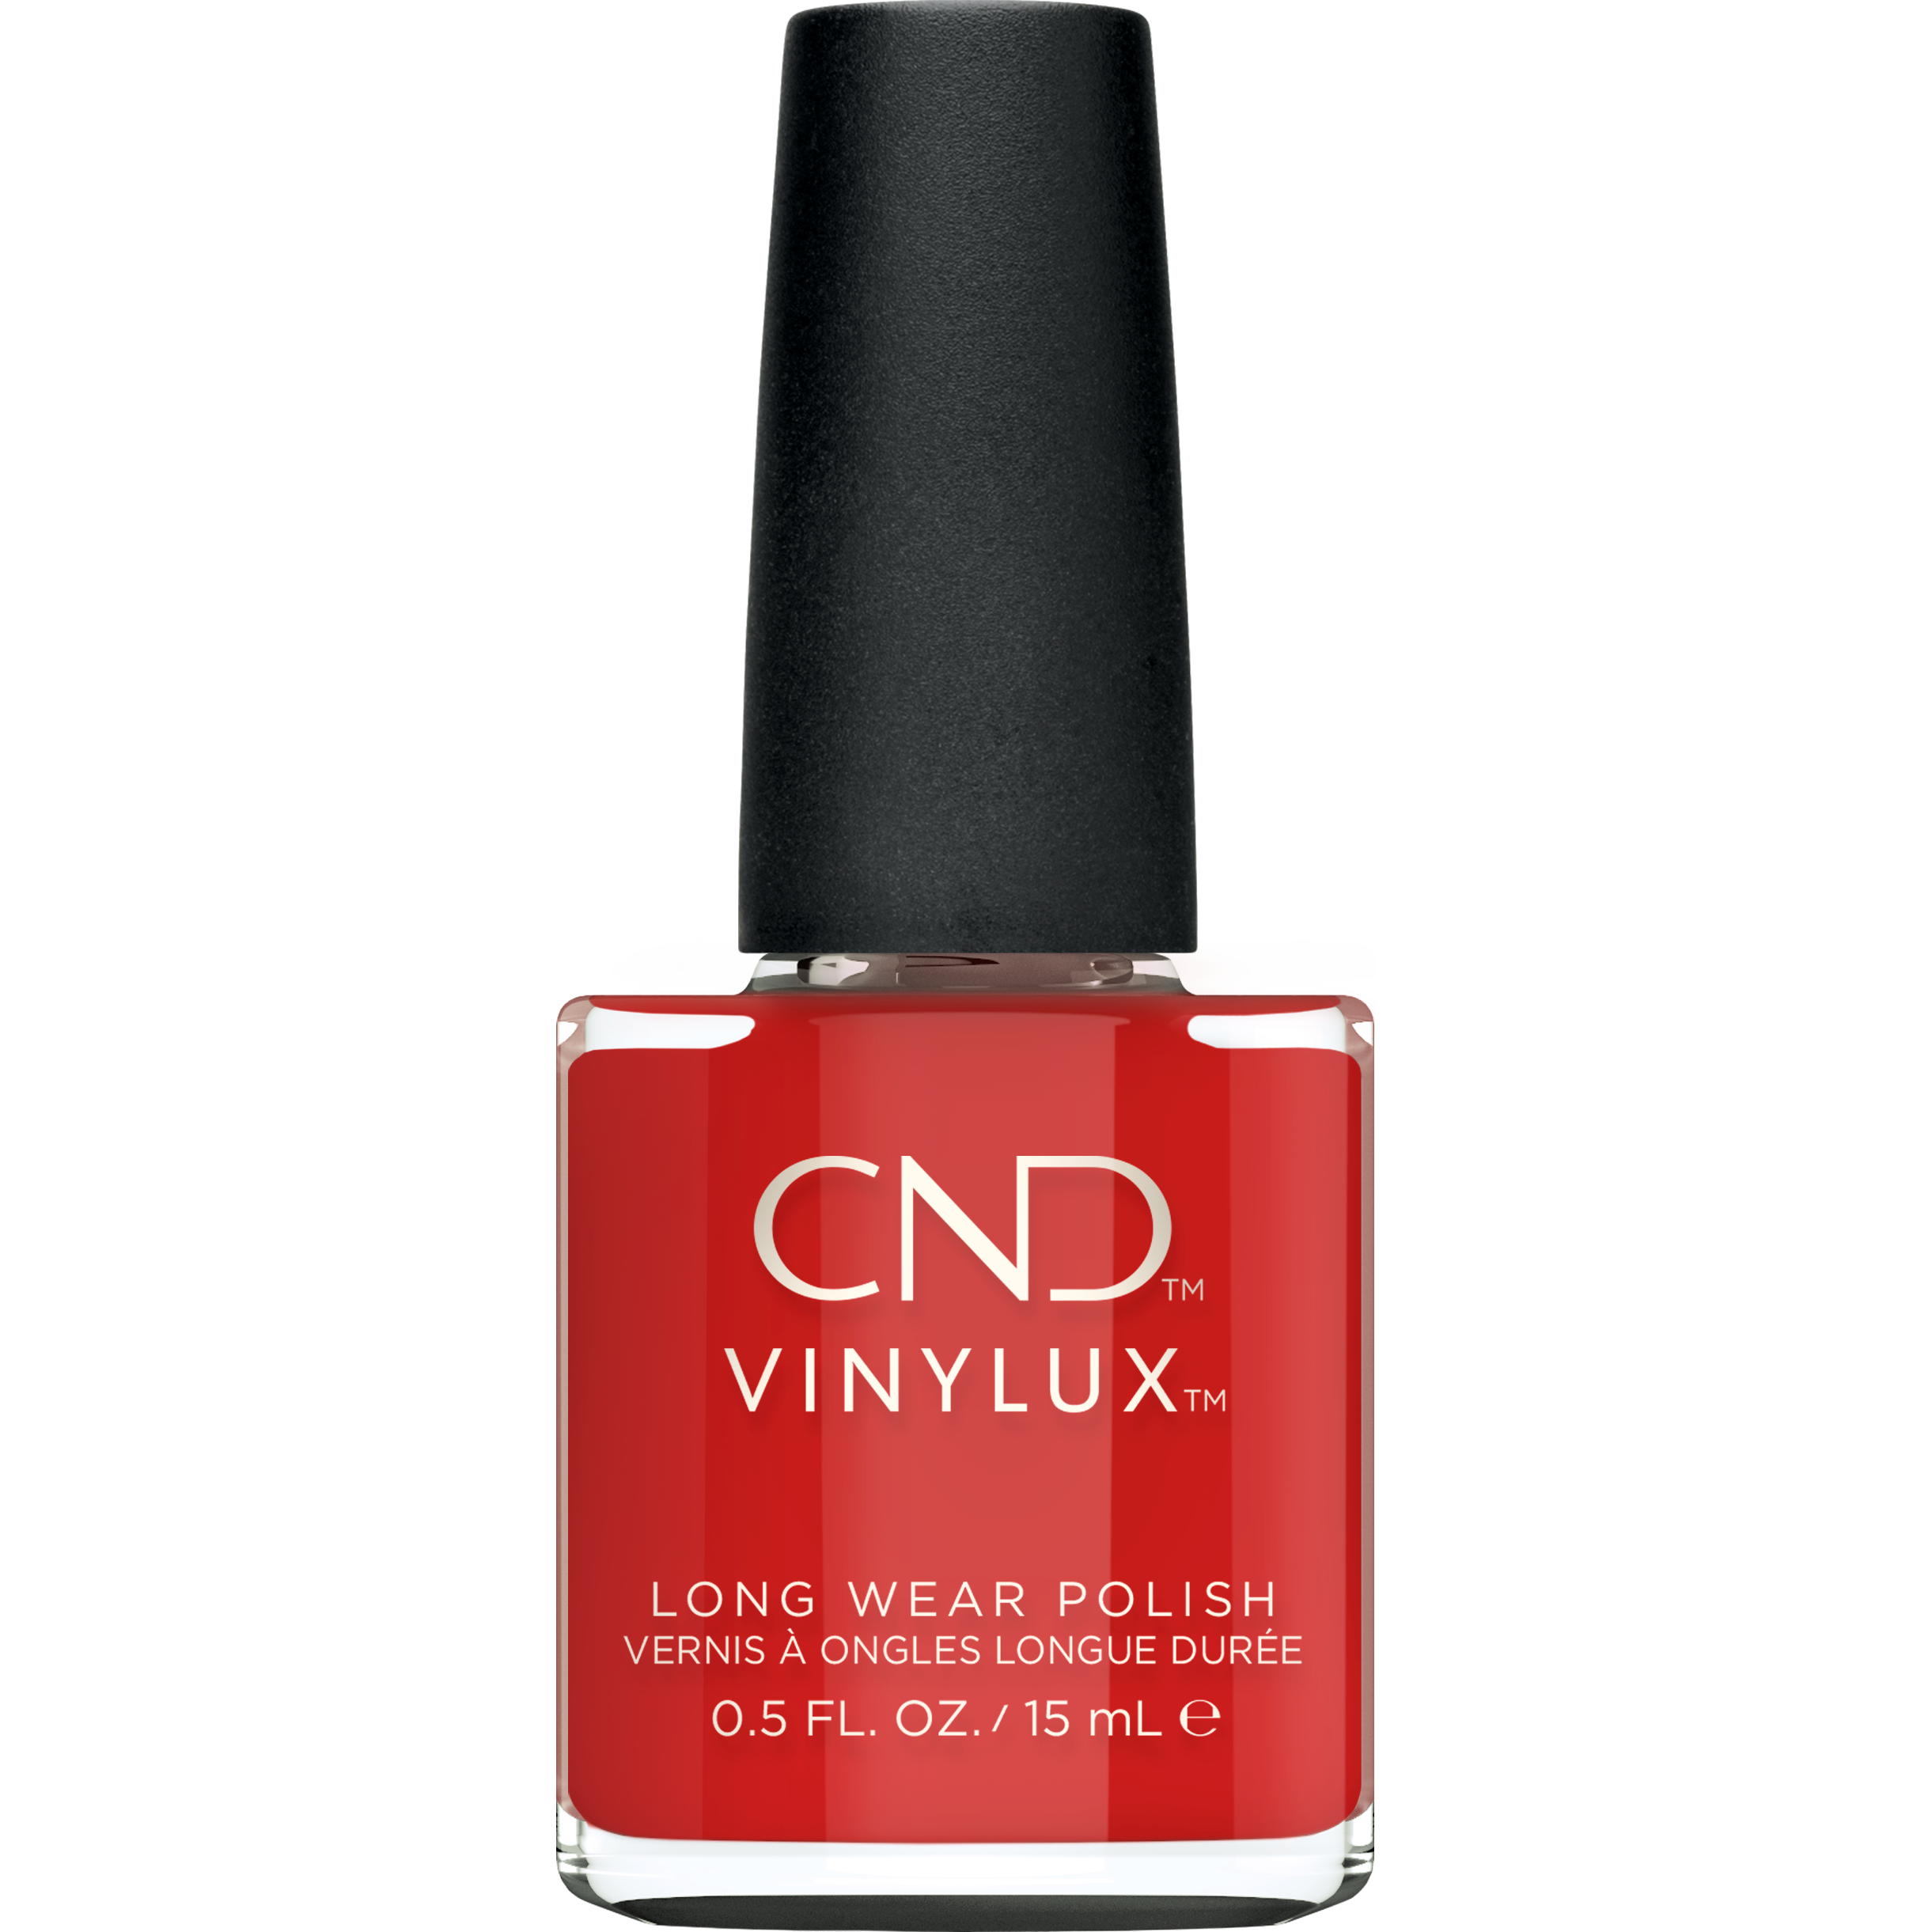 CND Vinylux Cocktail Couture Collection Devil Red #364